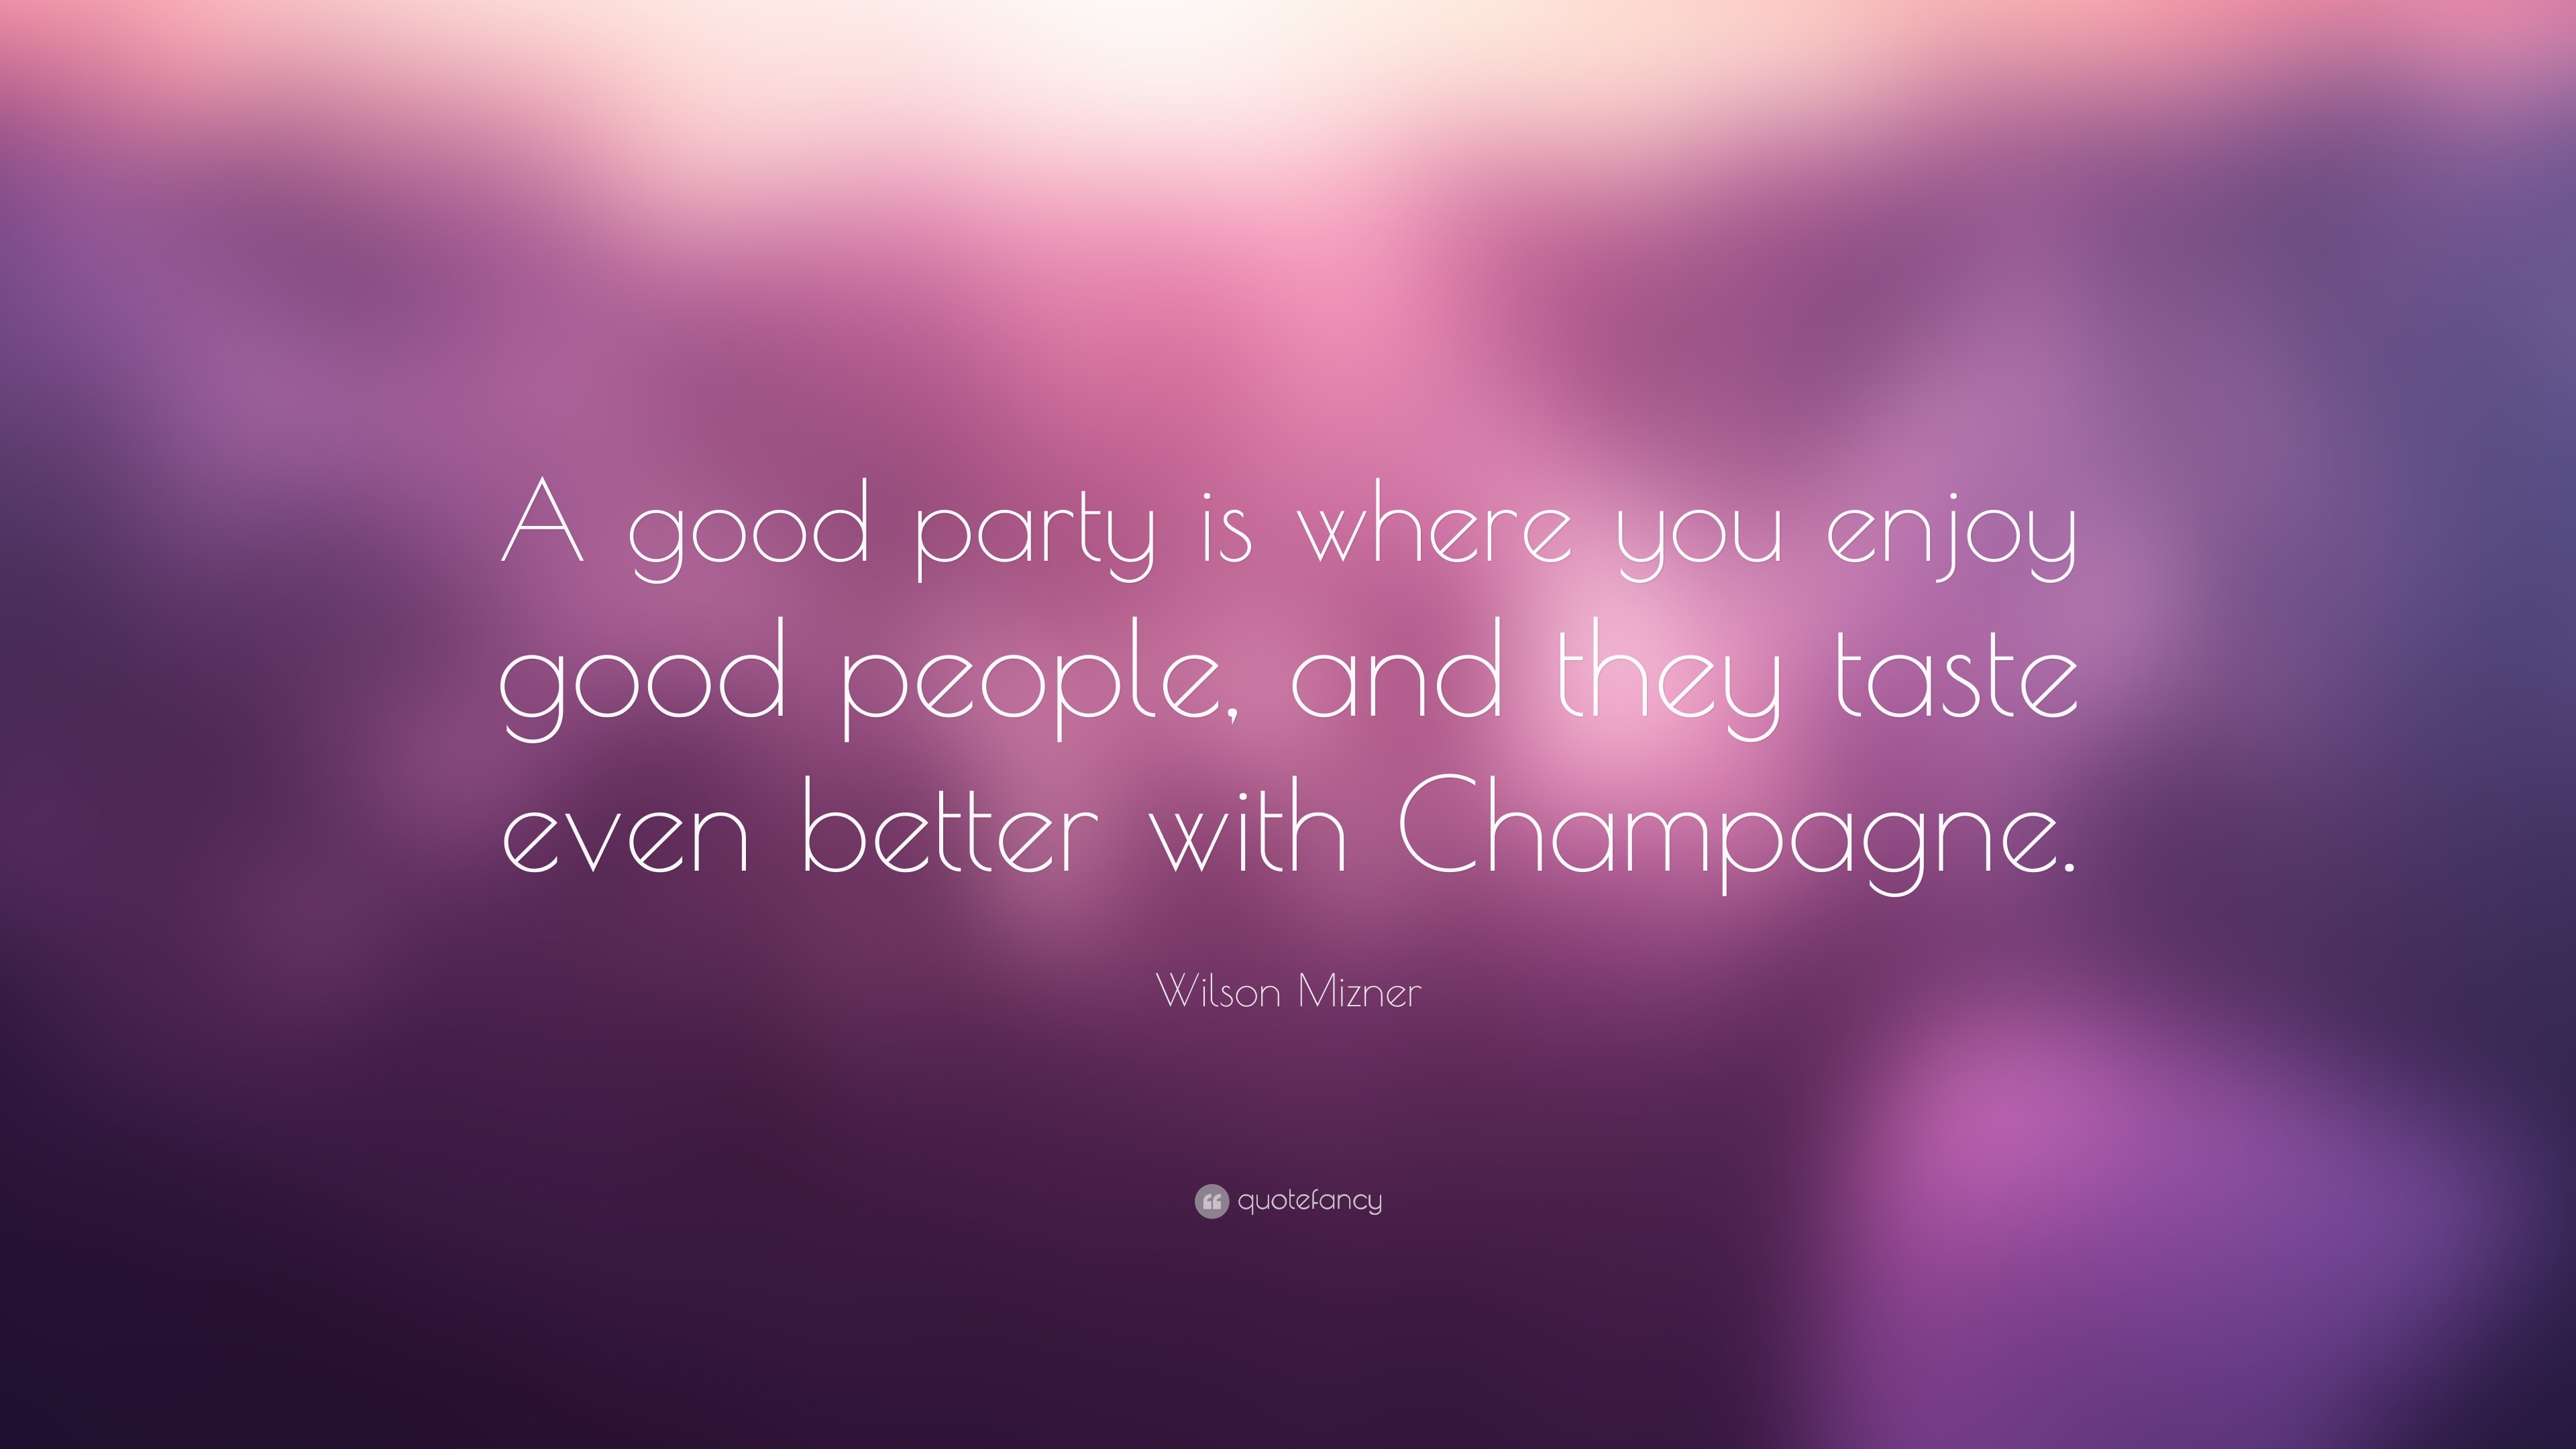 Wilson Mizner Quote: “A good party is where you enjoy good people, and ...